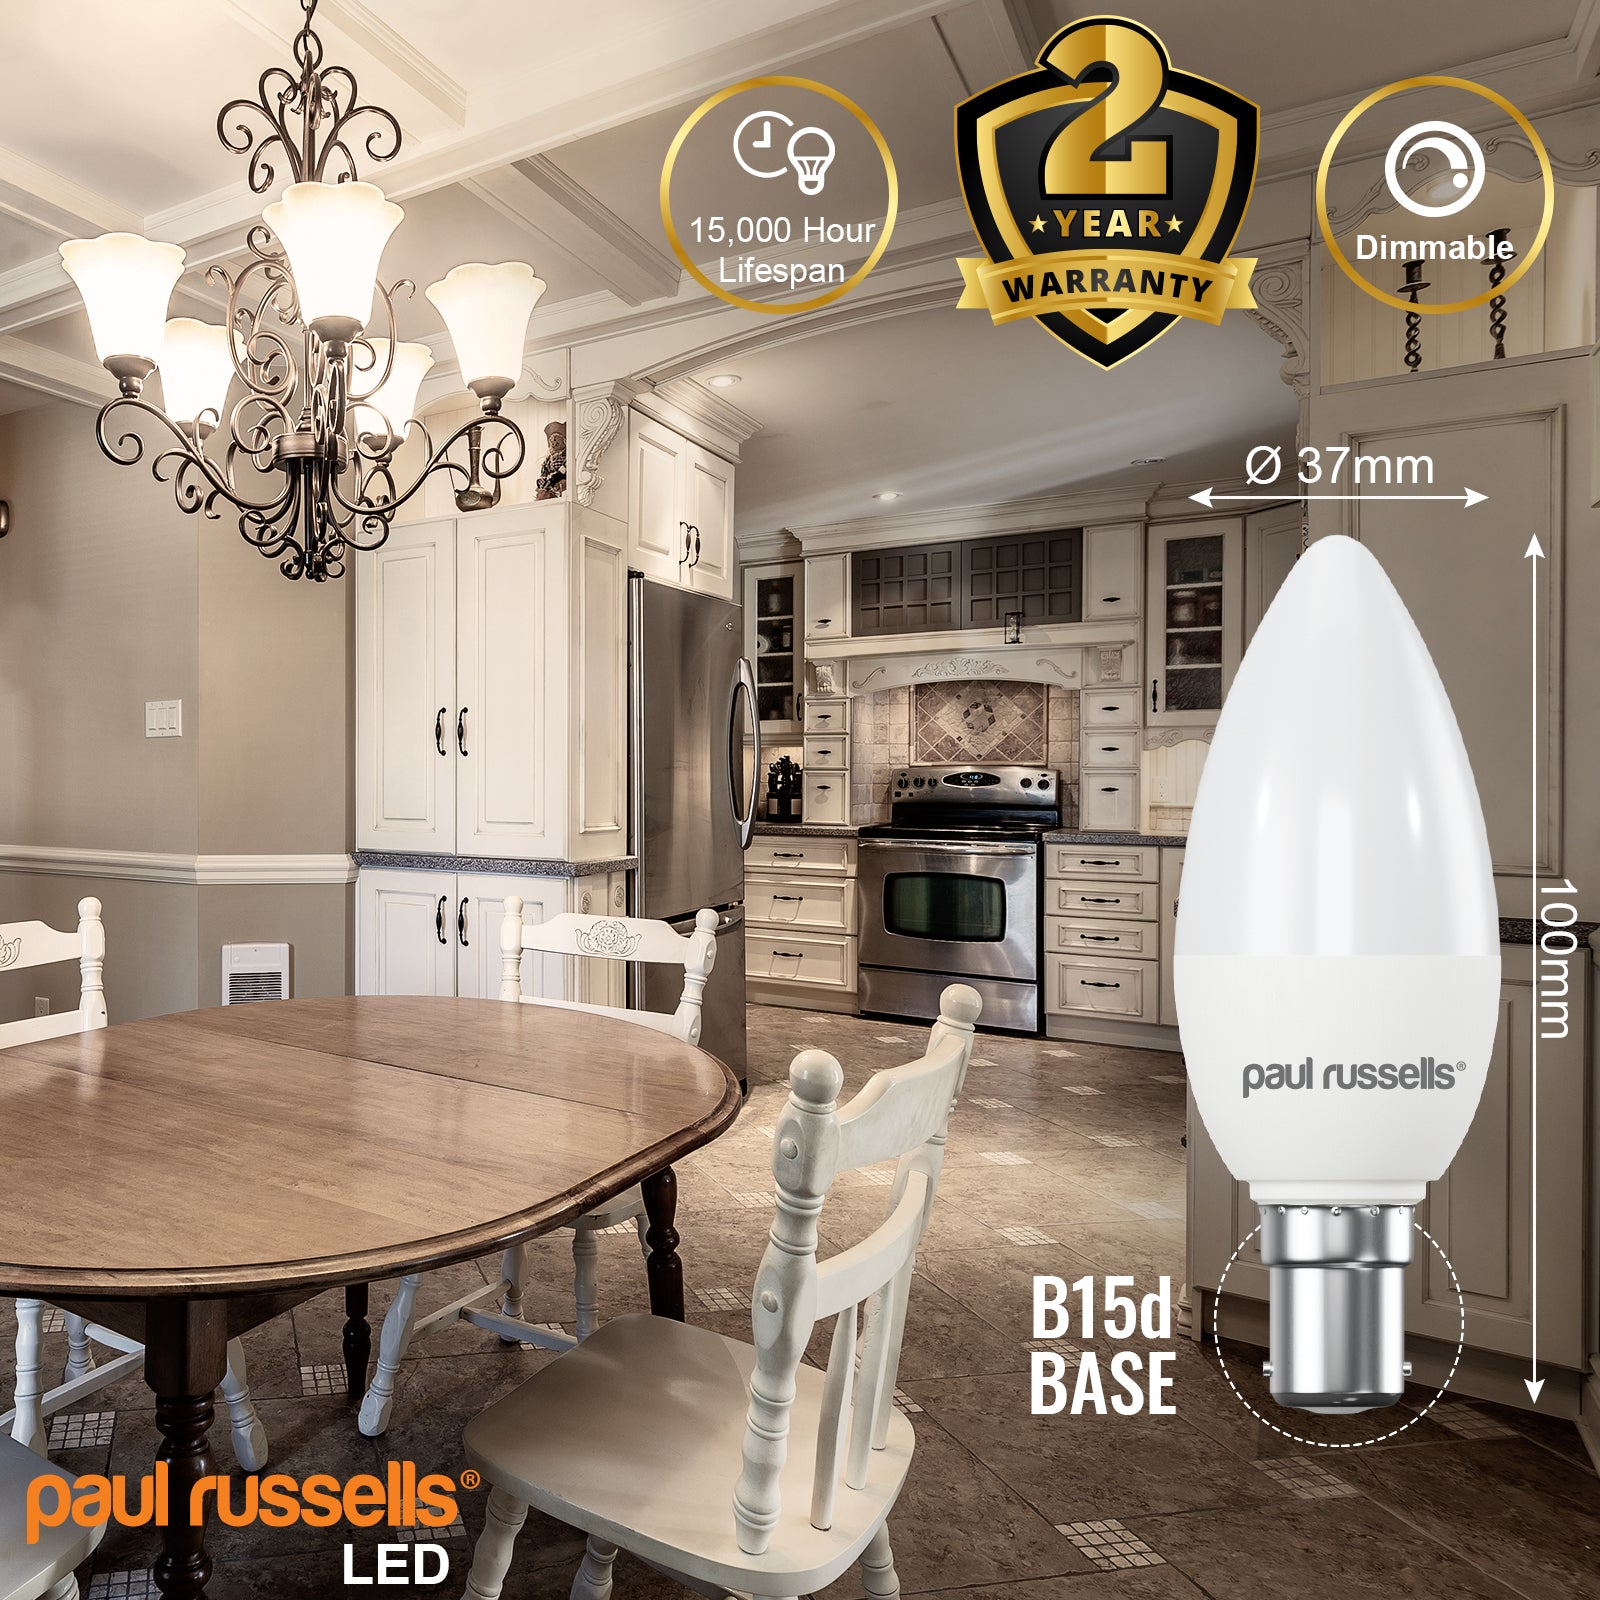 LED Dimmable Candle 5.5W (40w), SBC/B15, 470 Lumens, Cool White(4000K), 240V